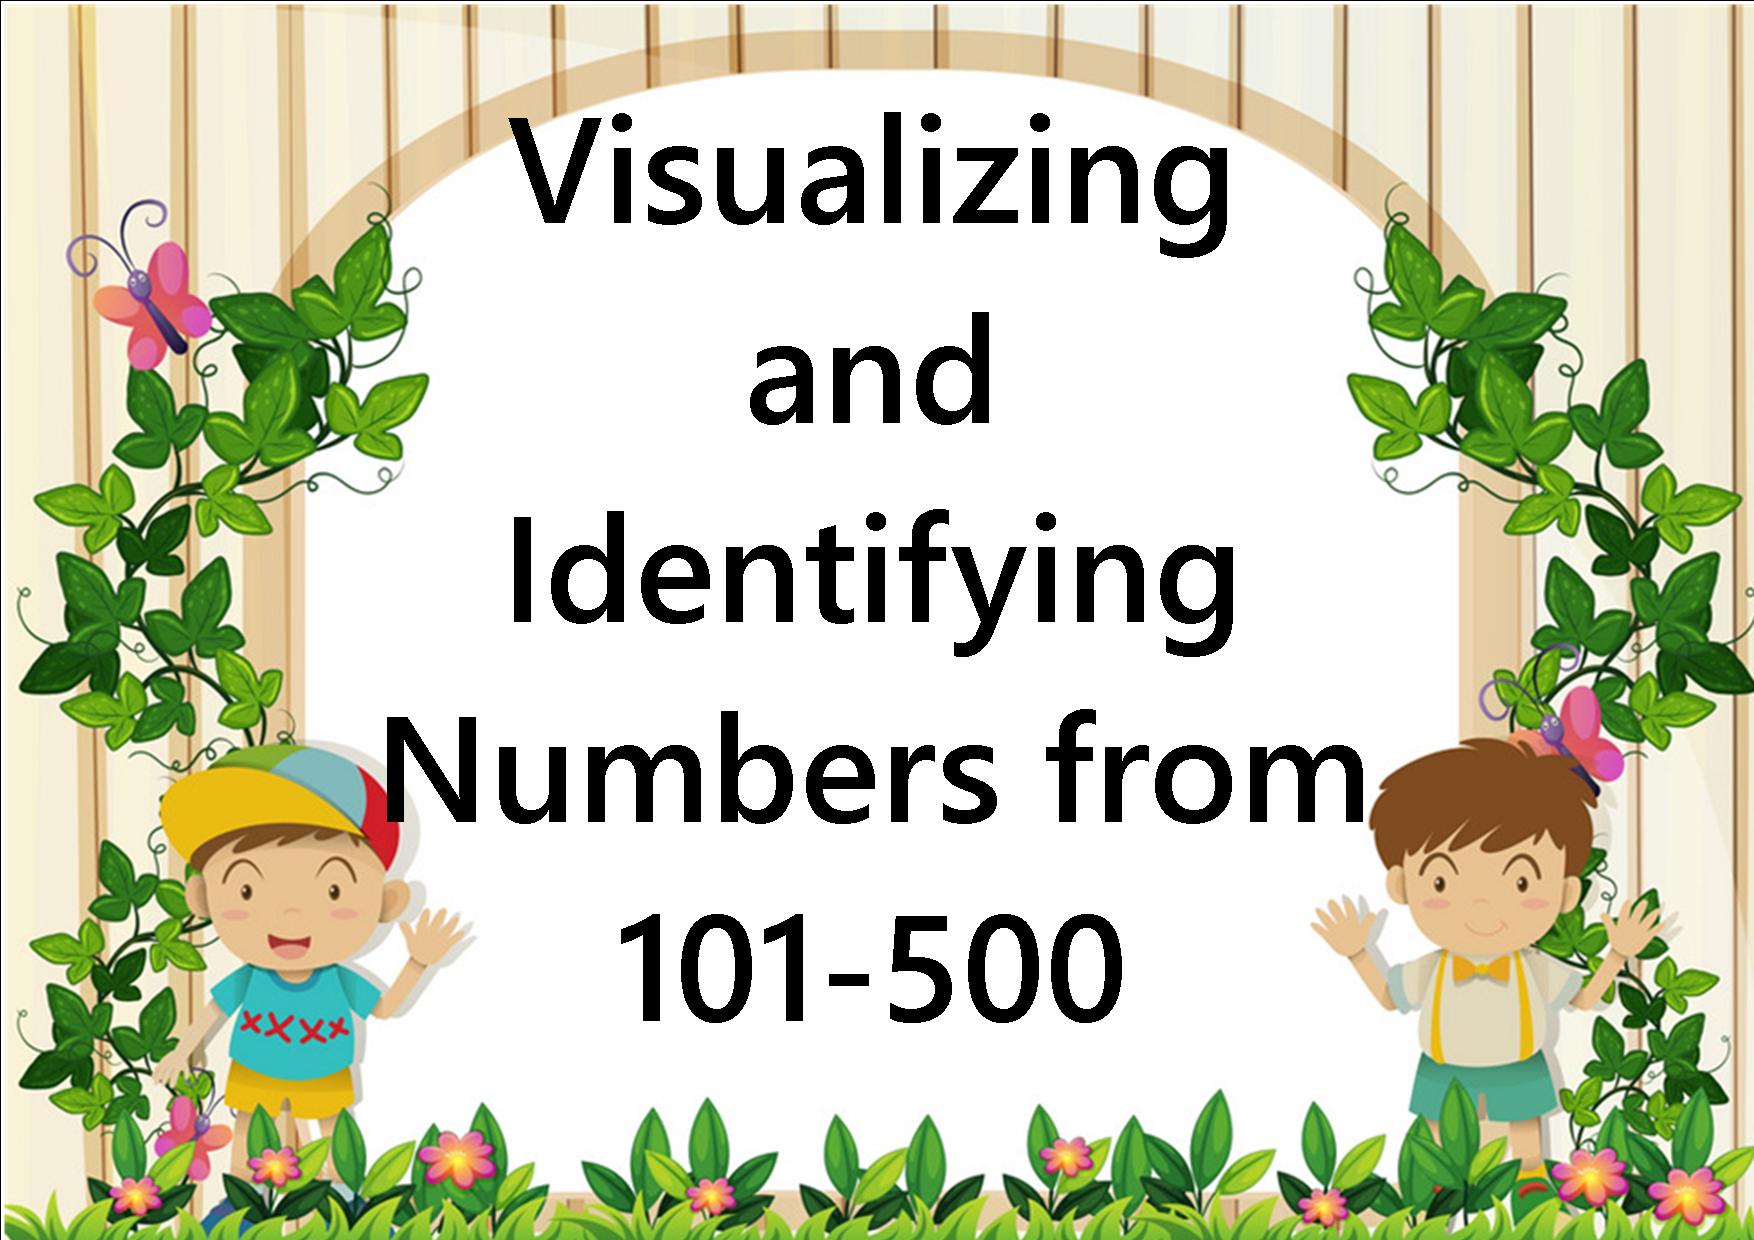 visualizing-and-identifying-numbers-from-101-500-quizizz